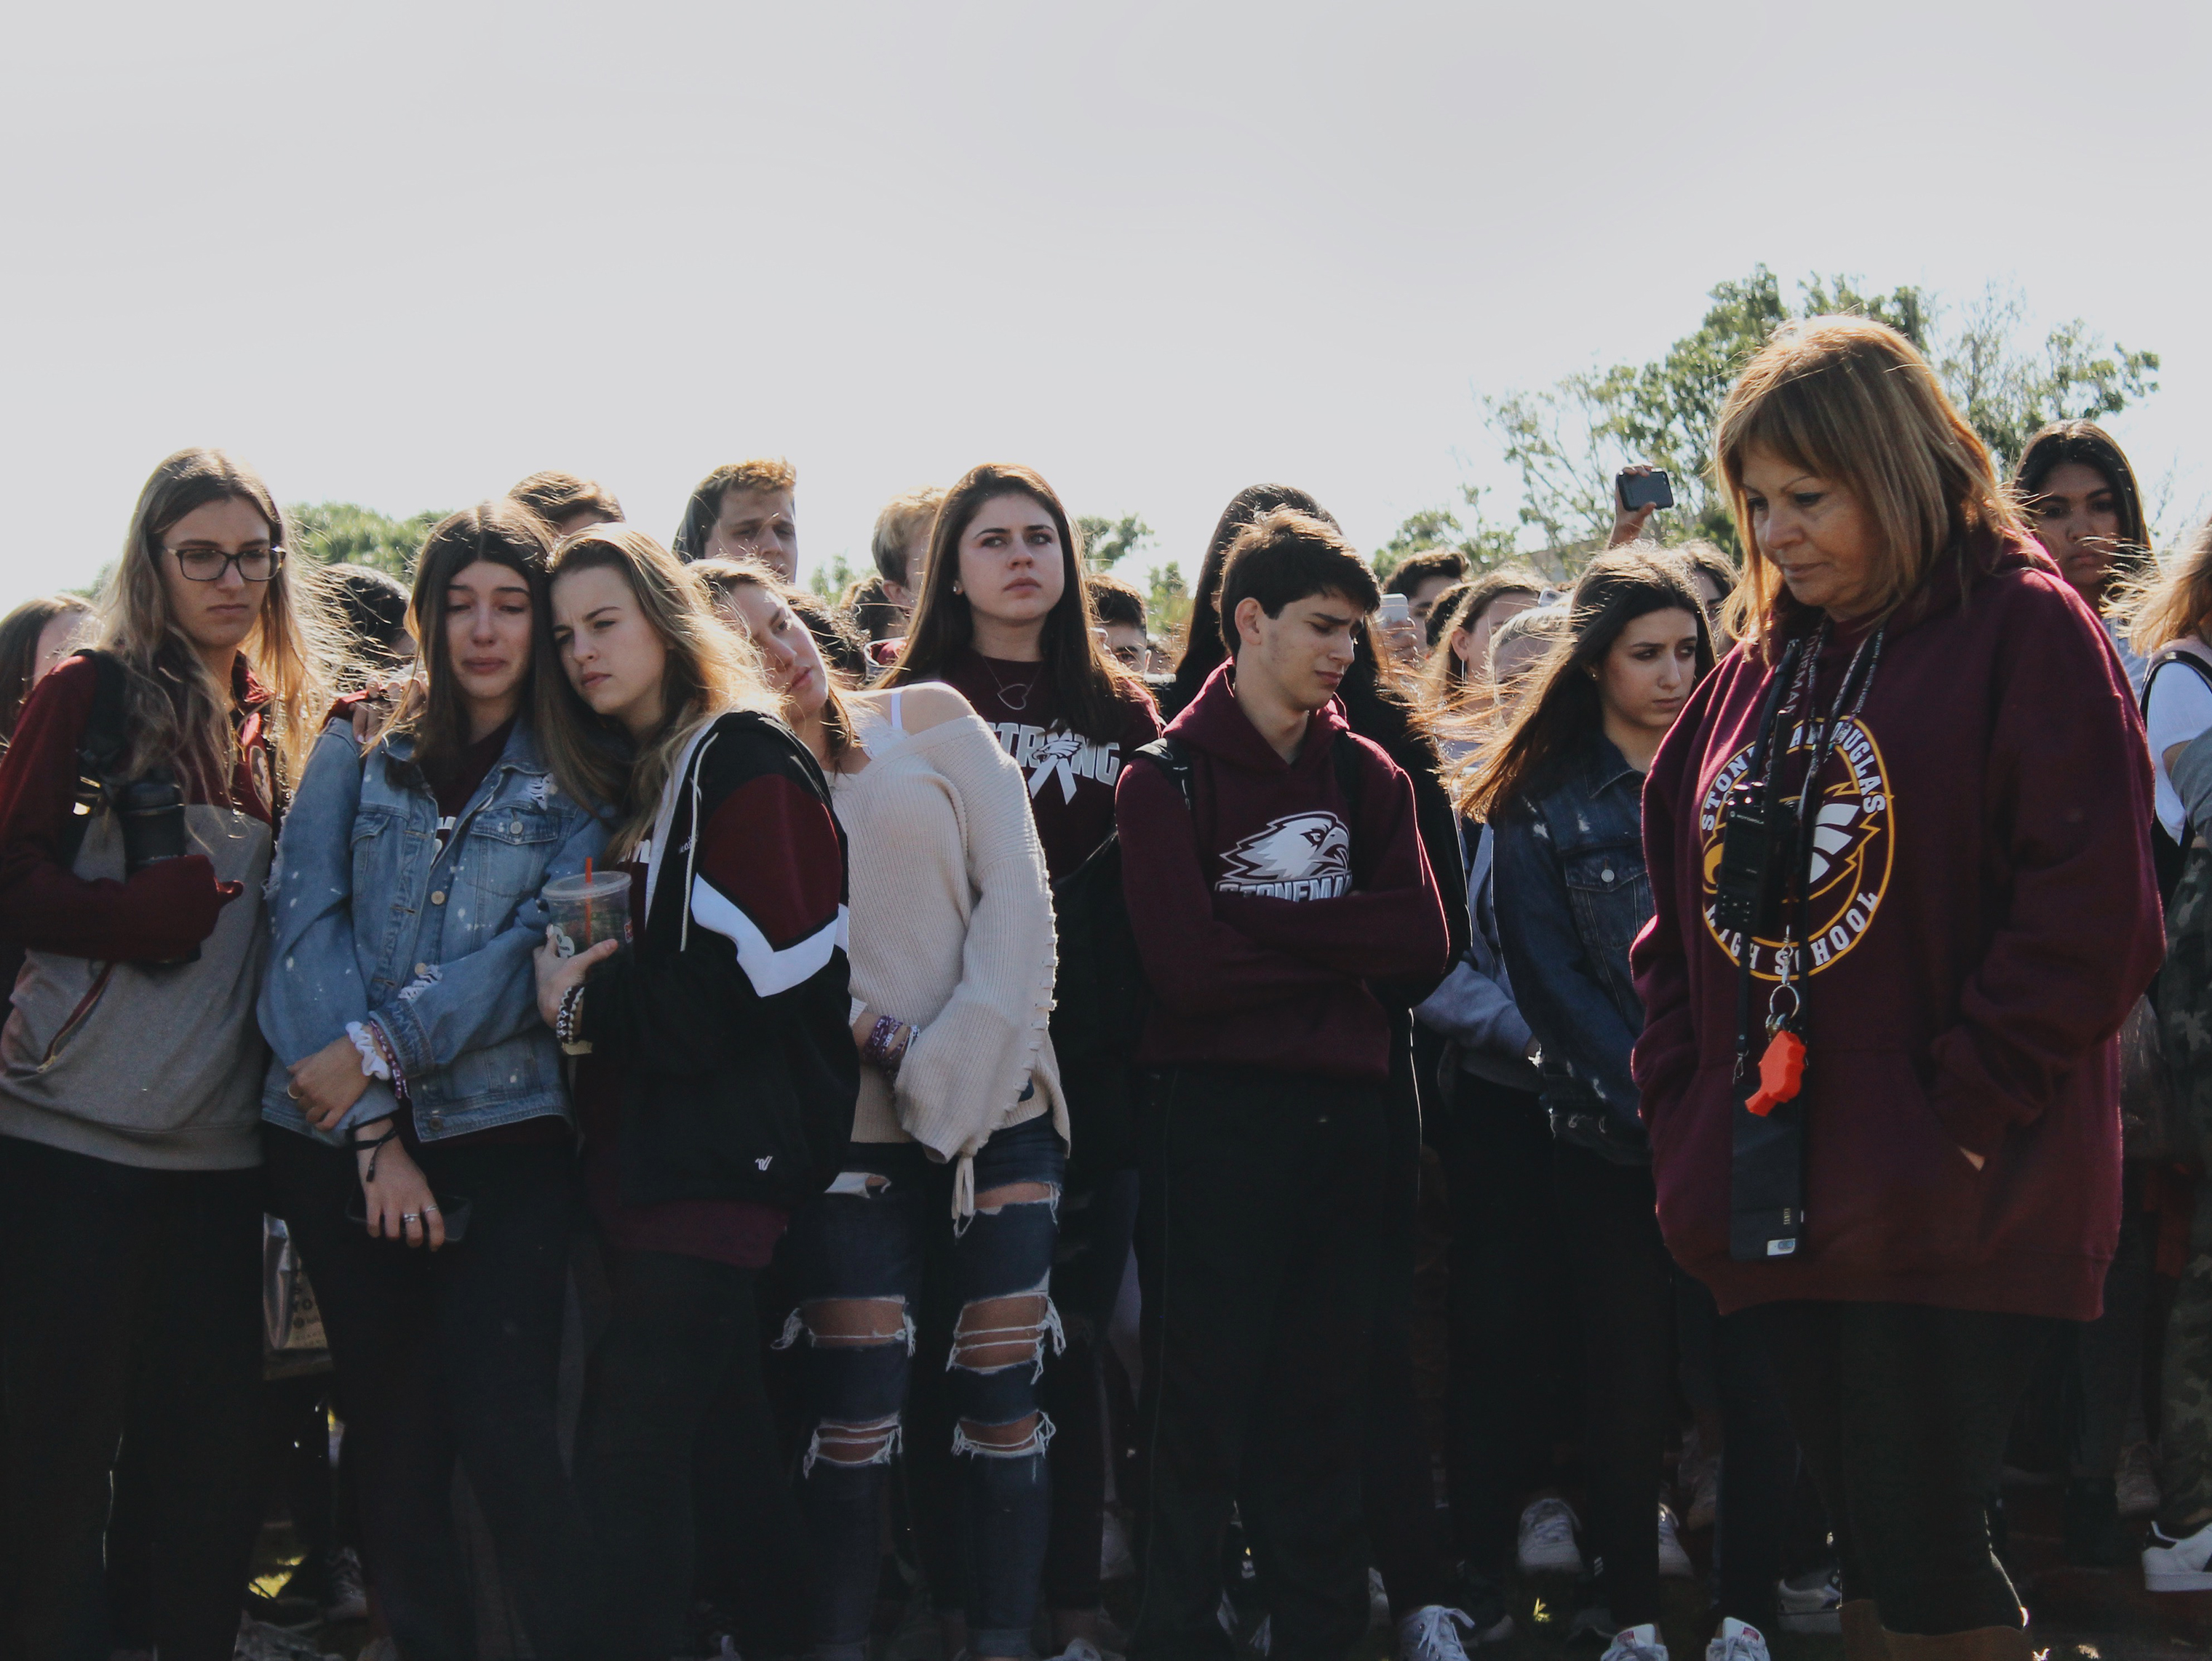 On March 14, Stoneman Douglas faculty members and students reflect on the past month’s experiences. (Rain Valladares)